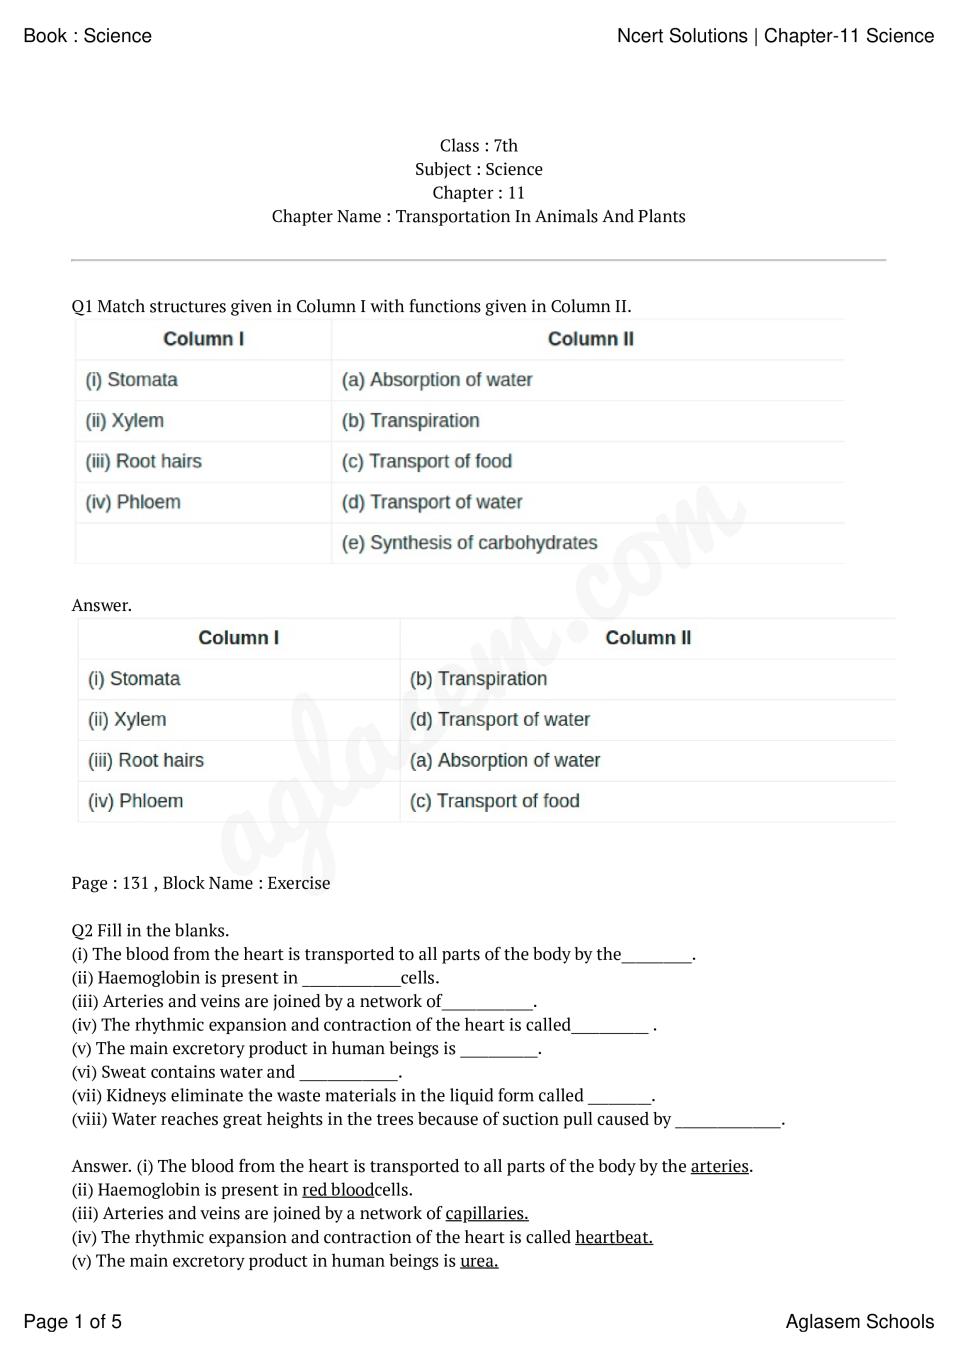 NCERT Solutions for Class 7 Science Chapter 11 Transportation in Animals  and Plants